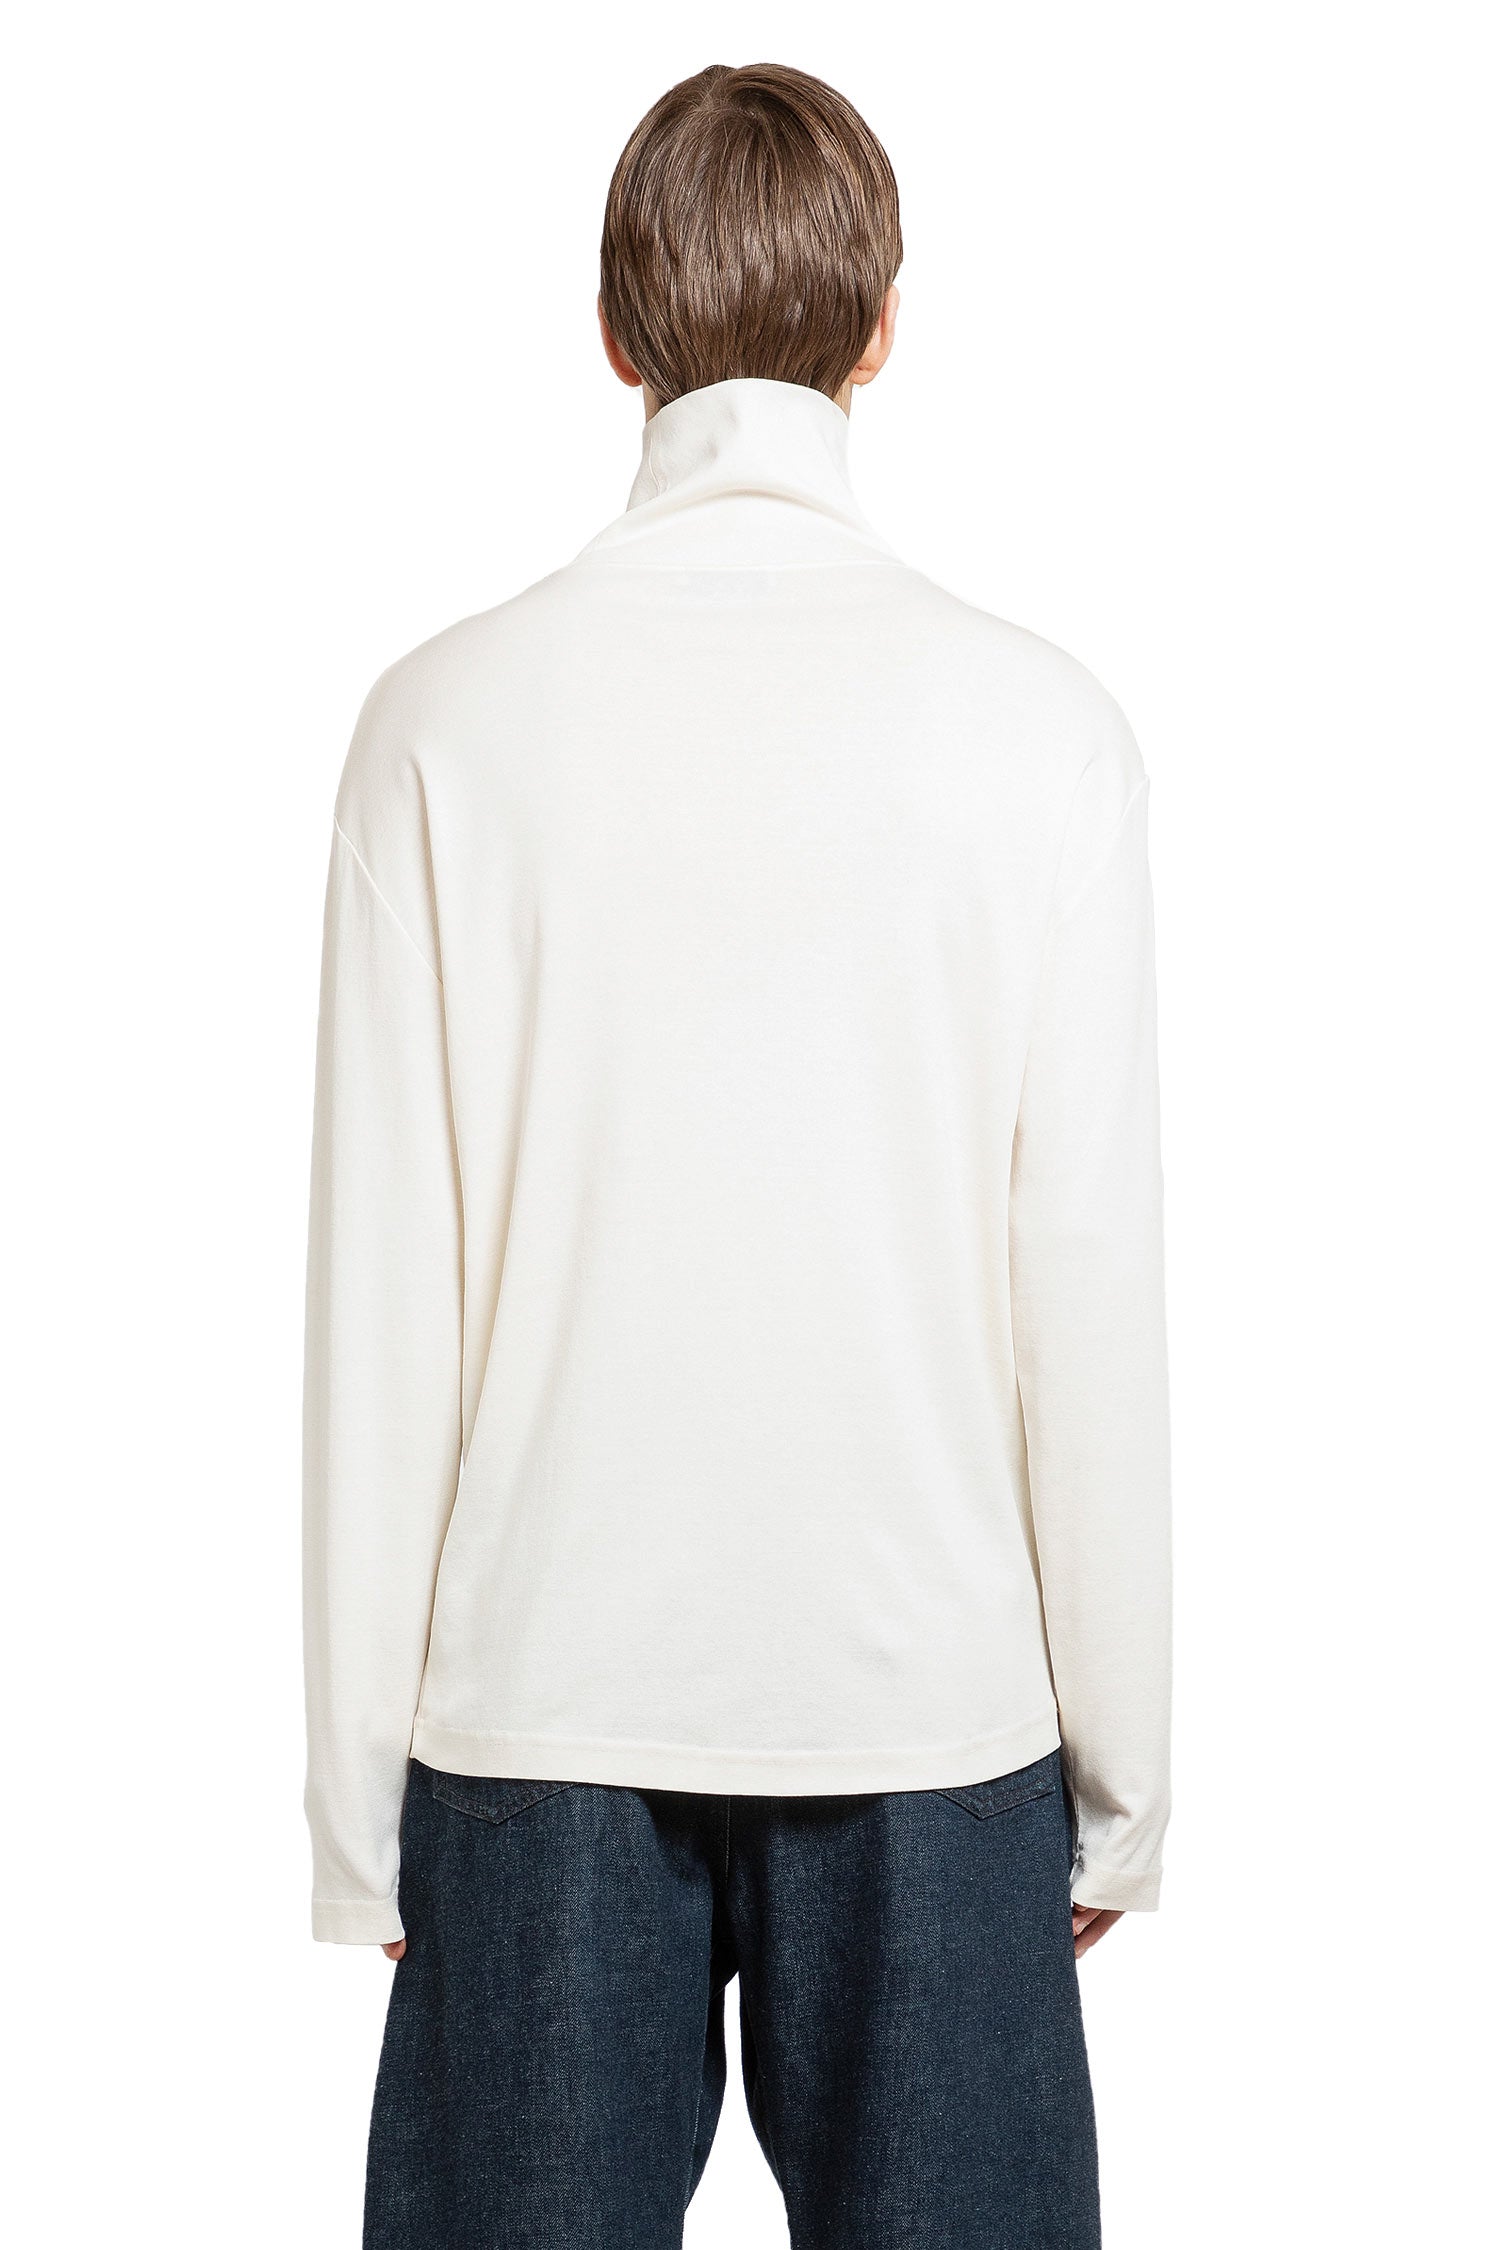 LEMAIRE MAN OFF-WHITE KNITWEAR